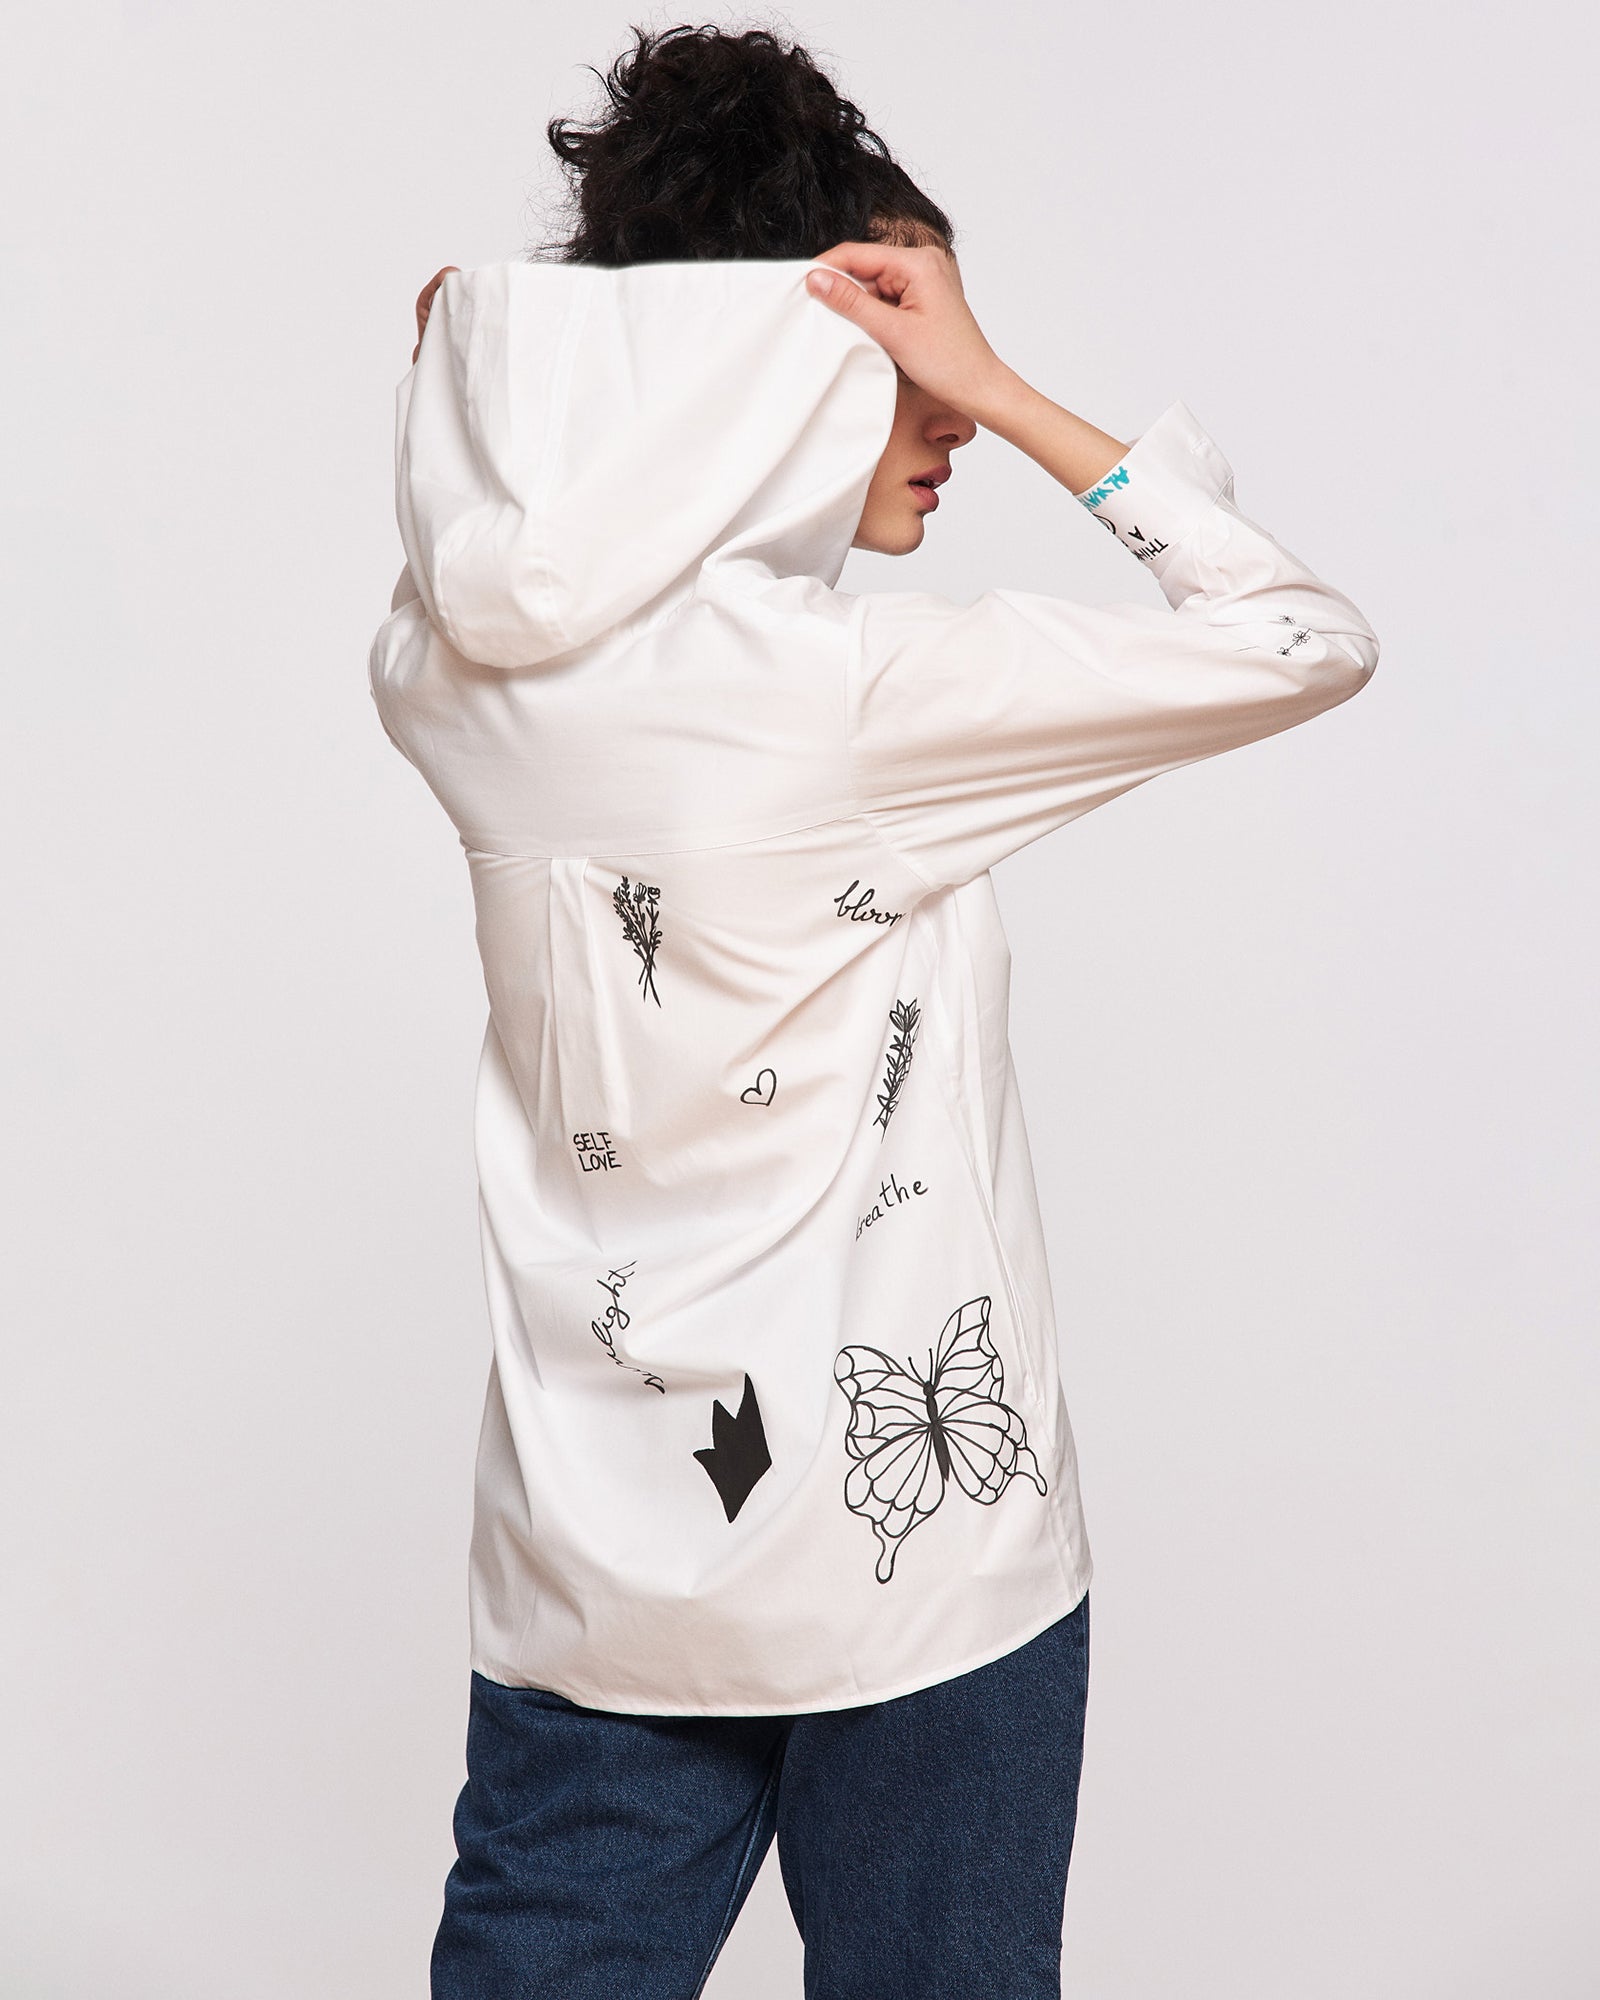 "Notes to self" women's hooded shirt